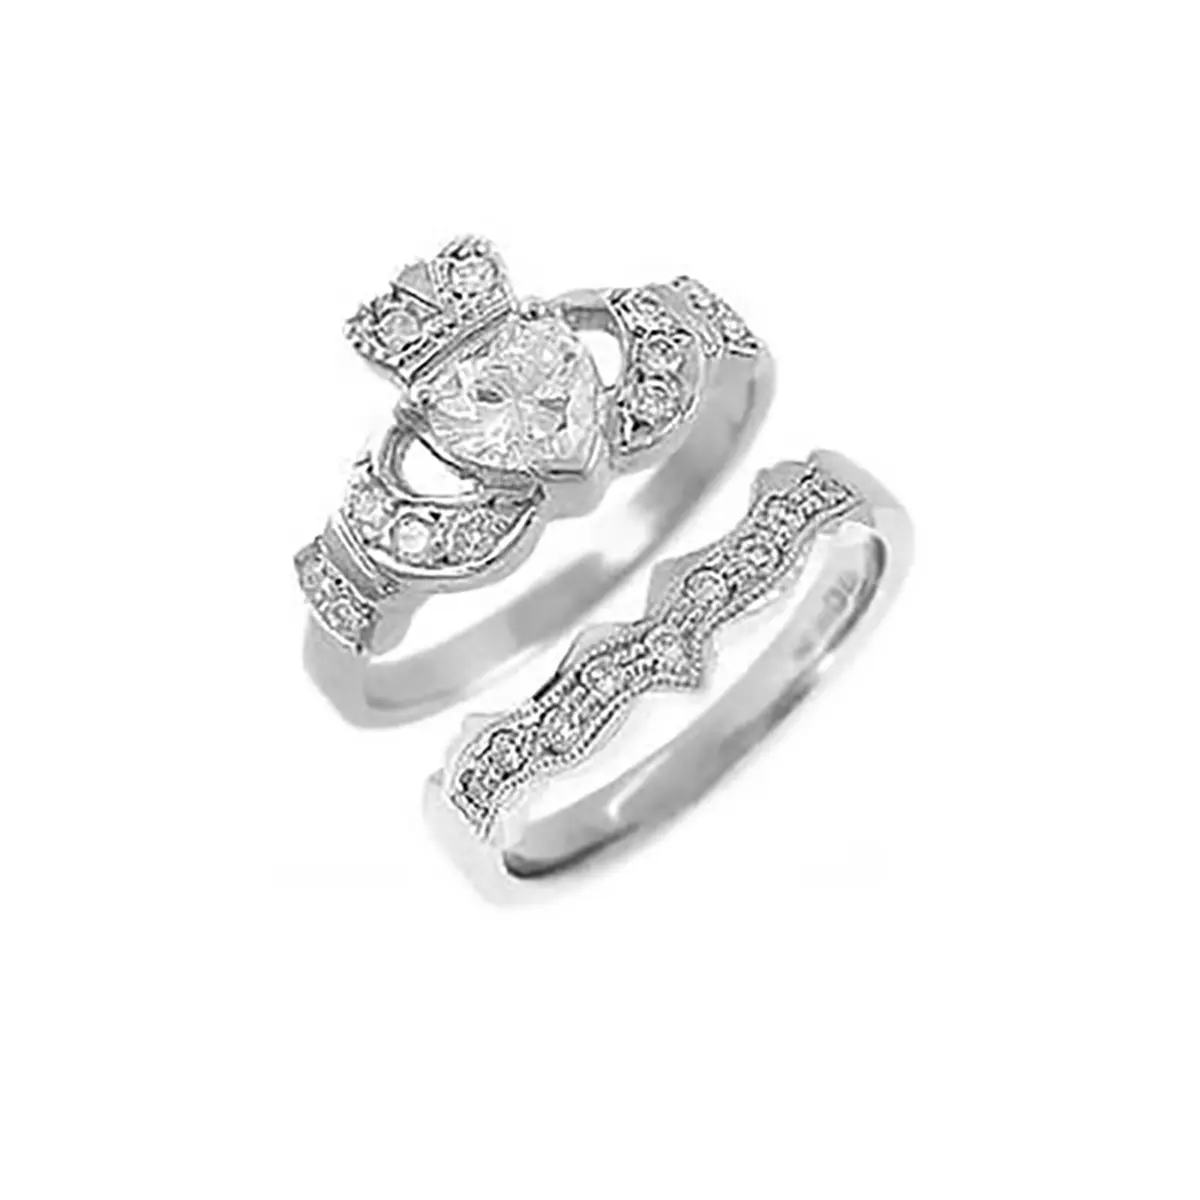 White Gold Claddagh Engagement and Wedding Ring Set ...